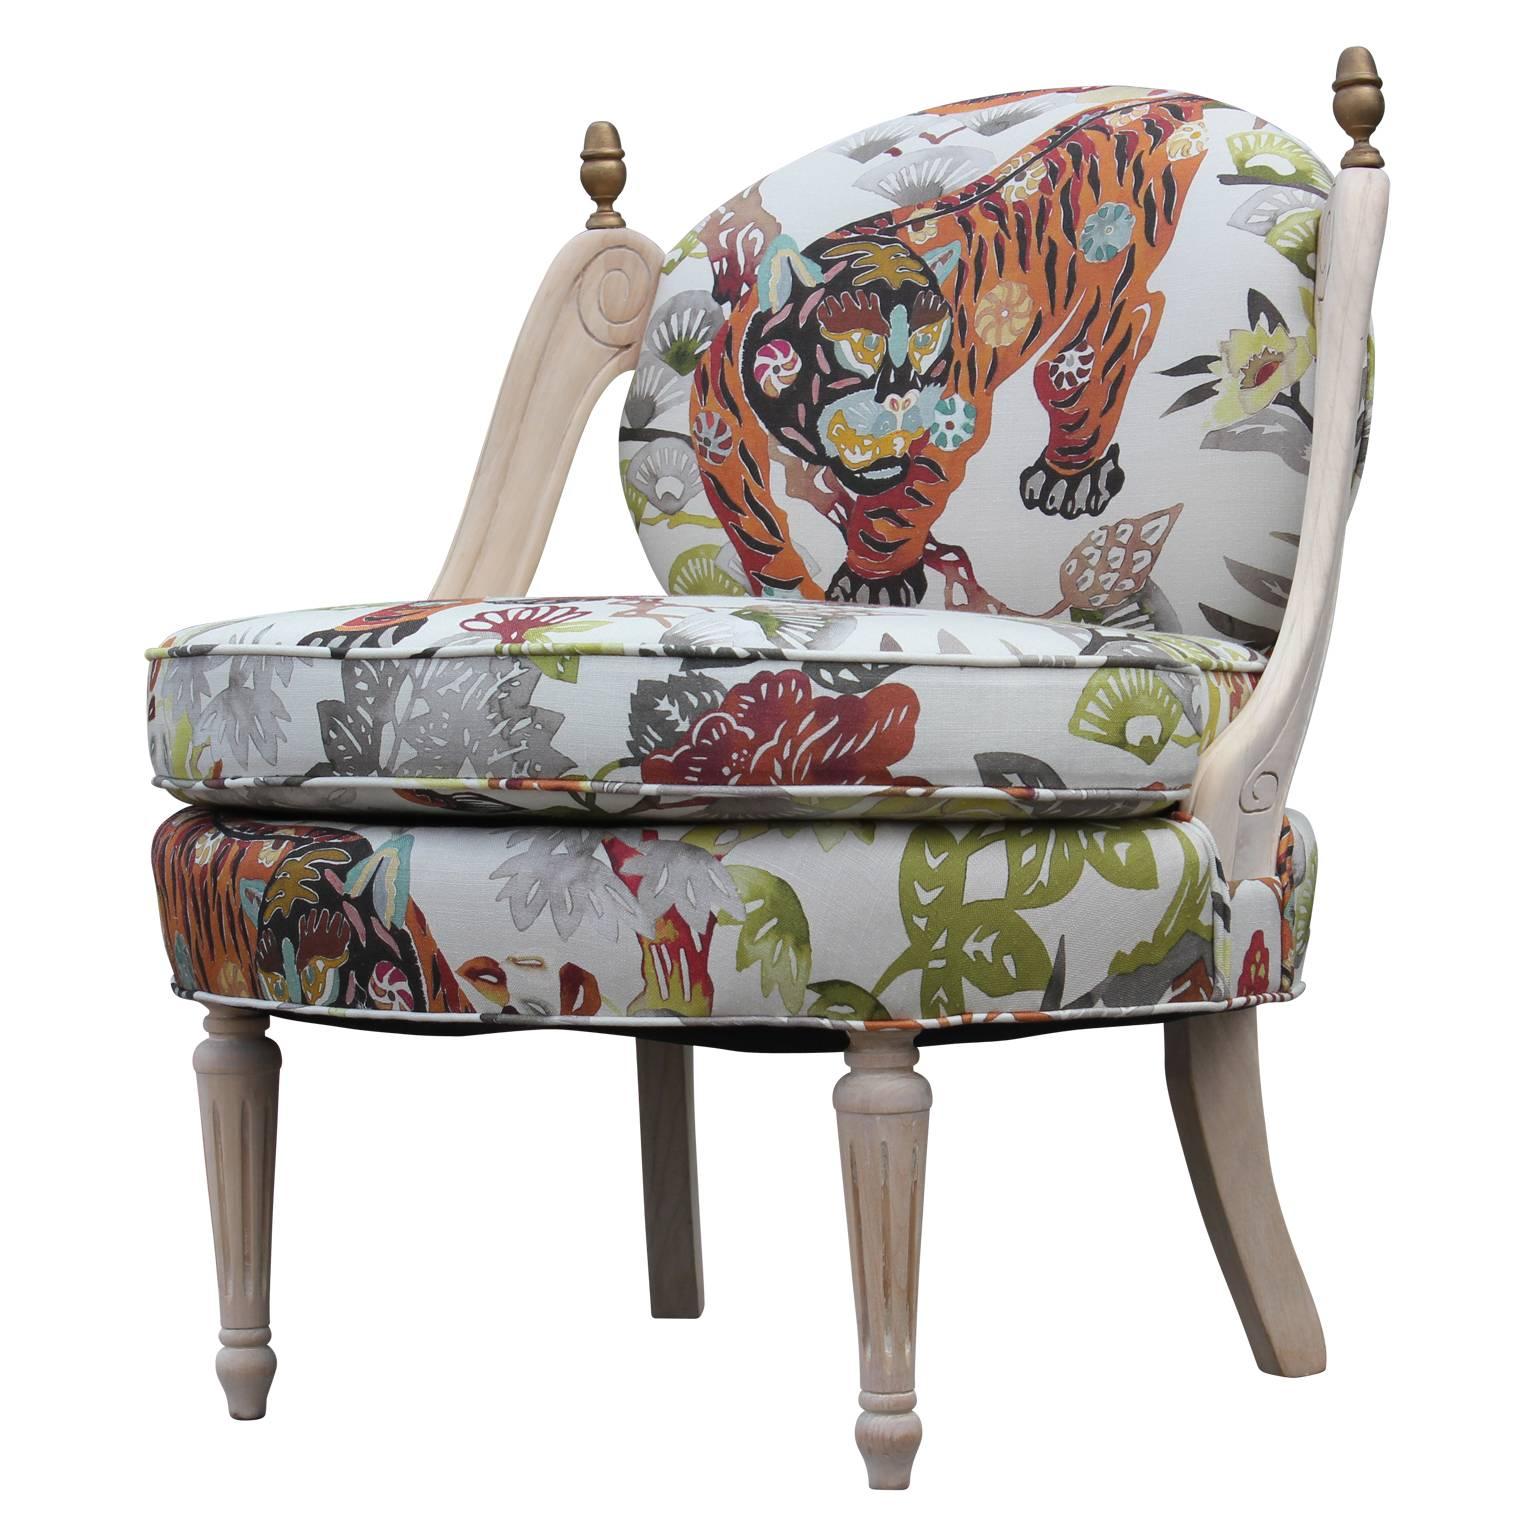 Exquisite Tiger Hollywood Regency slipper lounge chairs. This chair has been reupholstered in a Kravet Sumbar patterned fabric. The frame of the chair has been stripped and bleached. The chair has been fully restored and is in excellent condition.